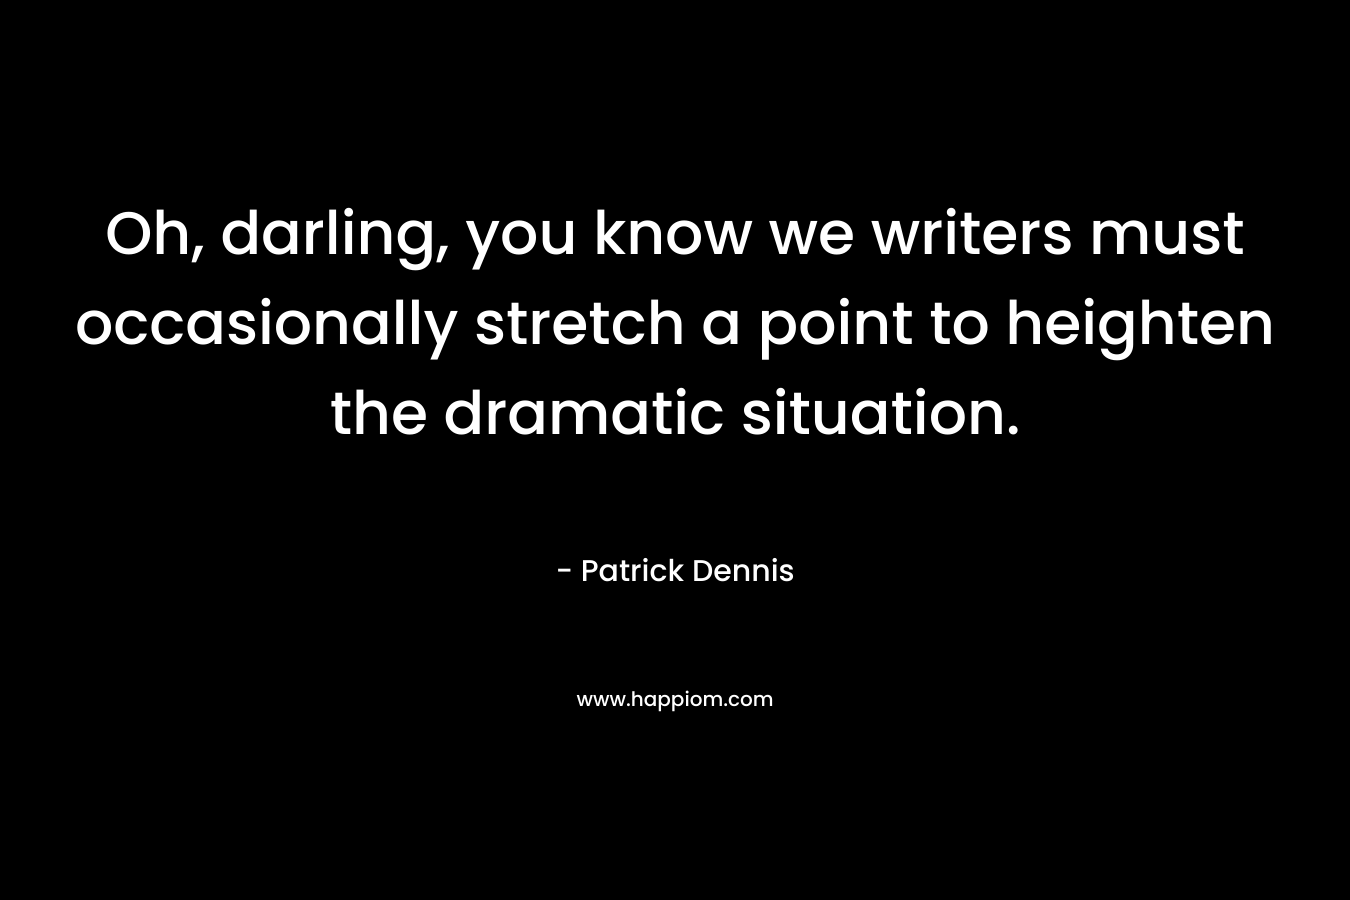 Oh, darling, you know we writers must occasionally stretch a point to heighten the dramatic situation. 